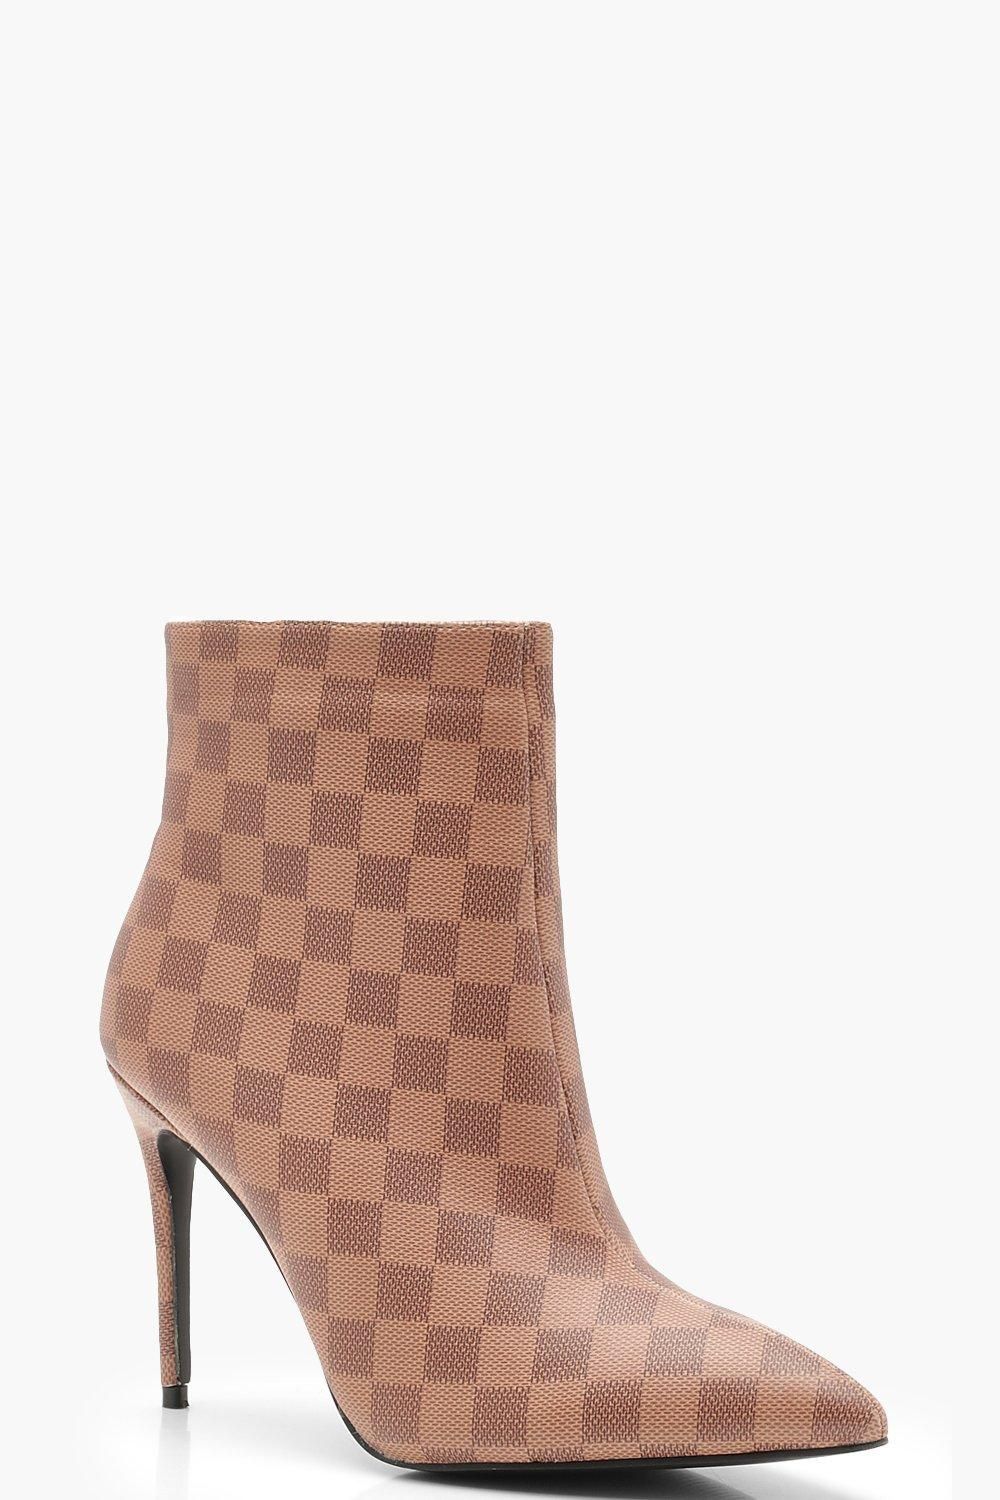 Contrast Check Pointed Toe Stiletto Shoe Boots | Boohoo.com (US & CA)